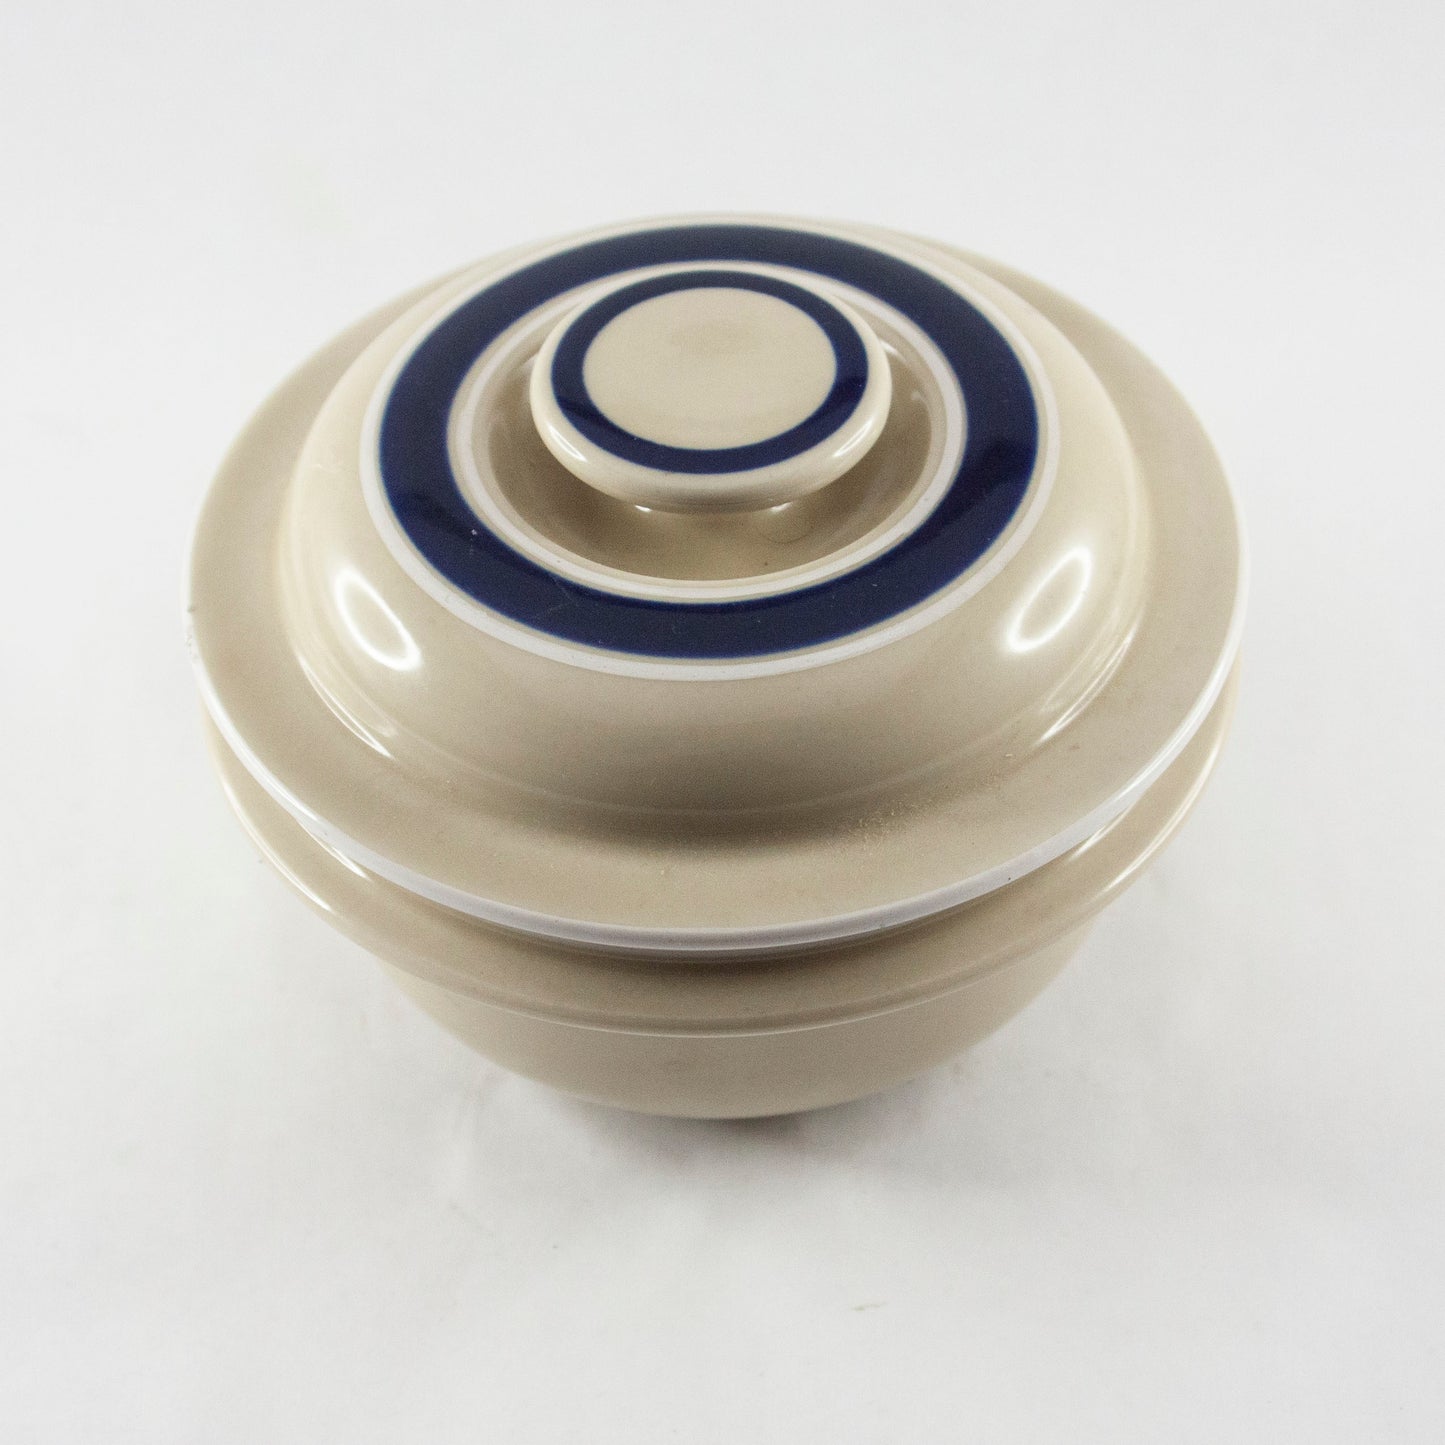 Large Cream Lidded Bowl with Blue Stripes